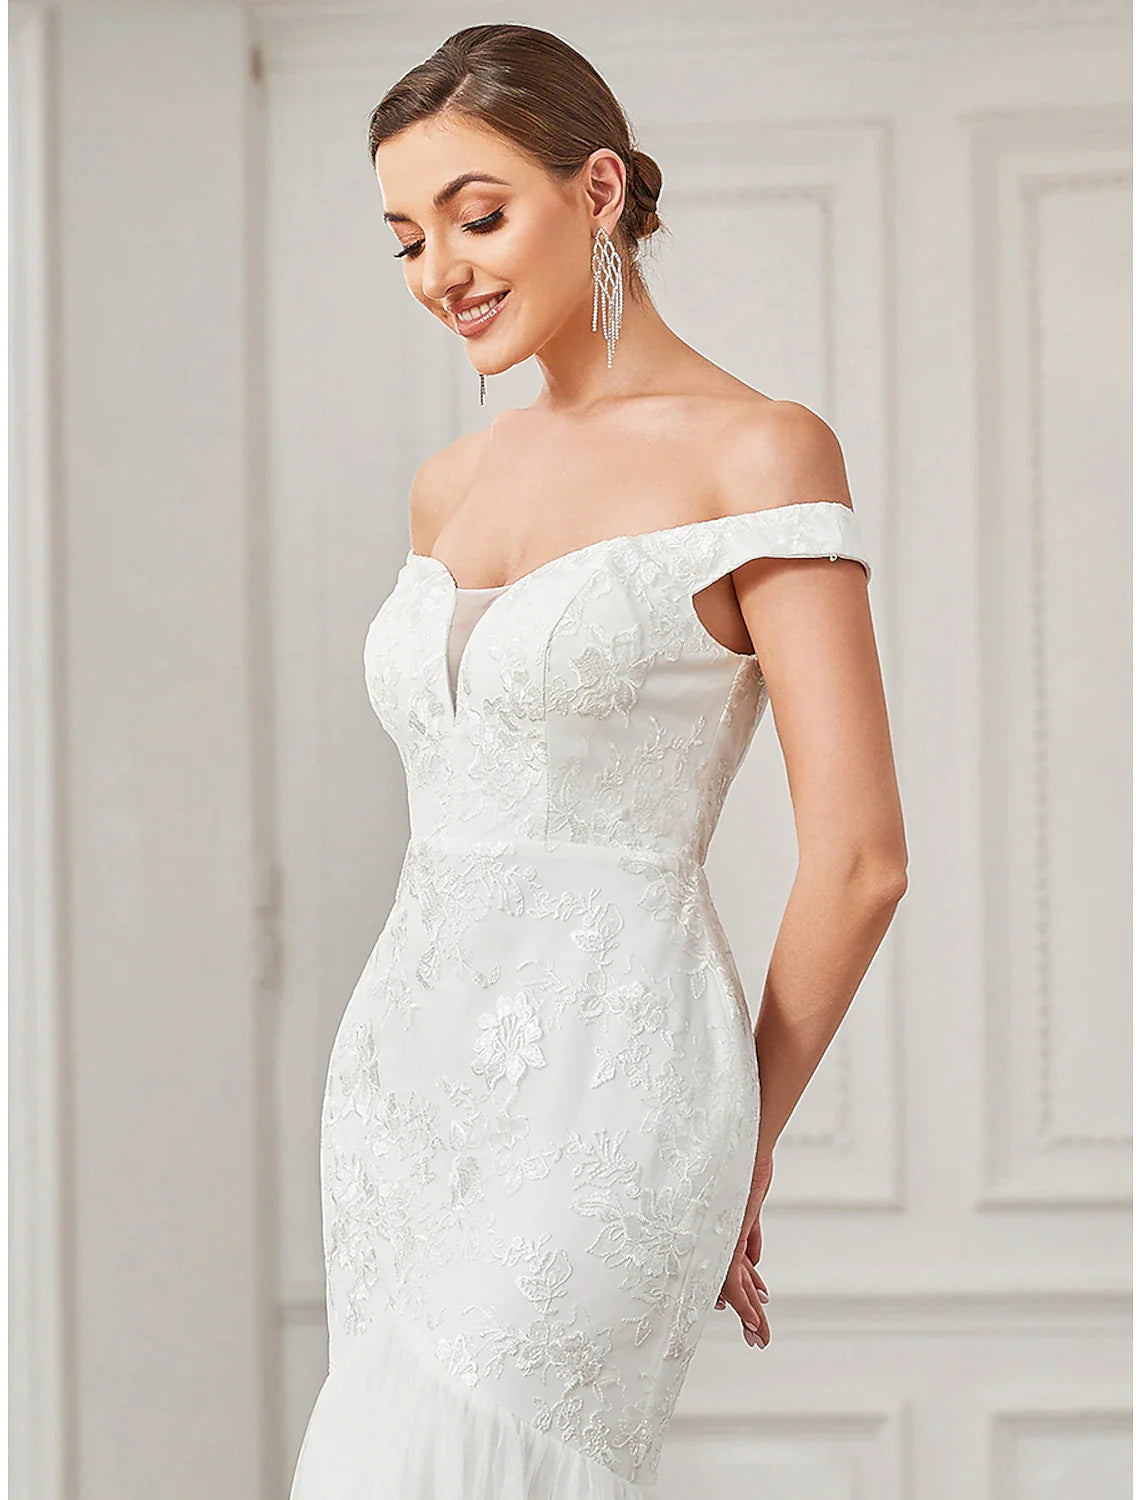 Beach Vintage Wedding Dresses Sweep / Brush Train A-Line Cap Sleeve Off Shoulder Lace With Lace Appliques